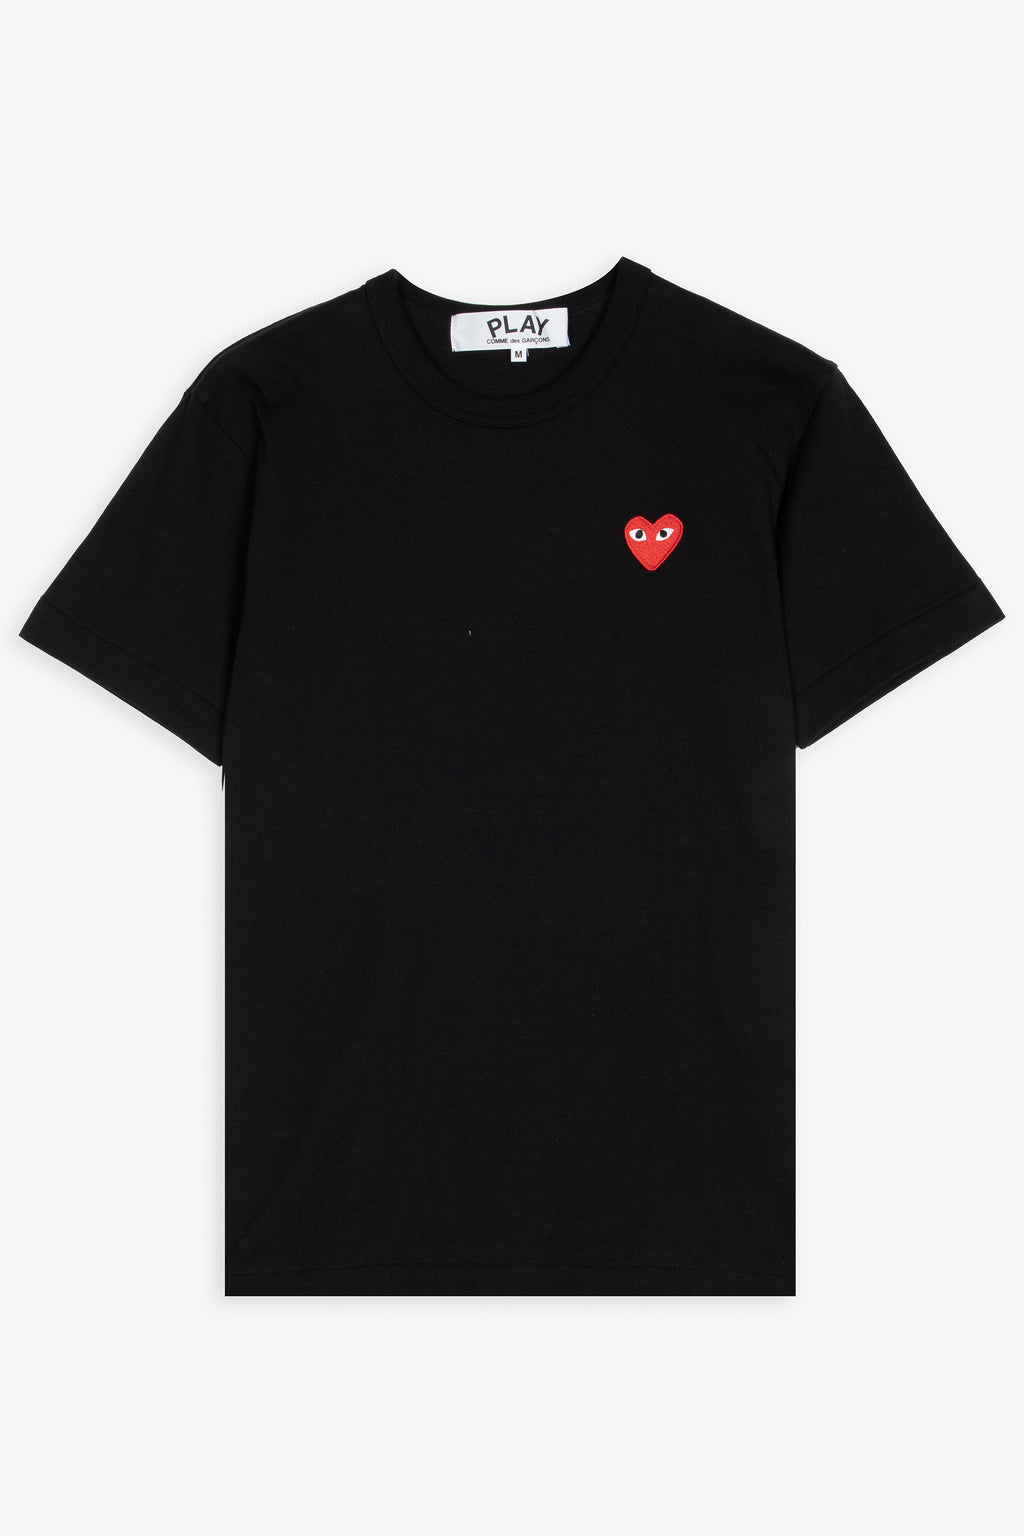 alt-image__Black-cotton-t-shirt-with-red-heart-patch-at-chest